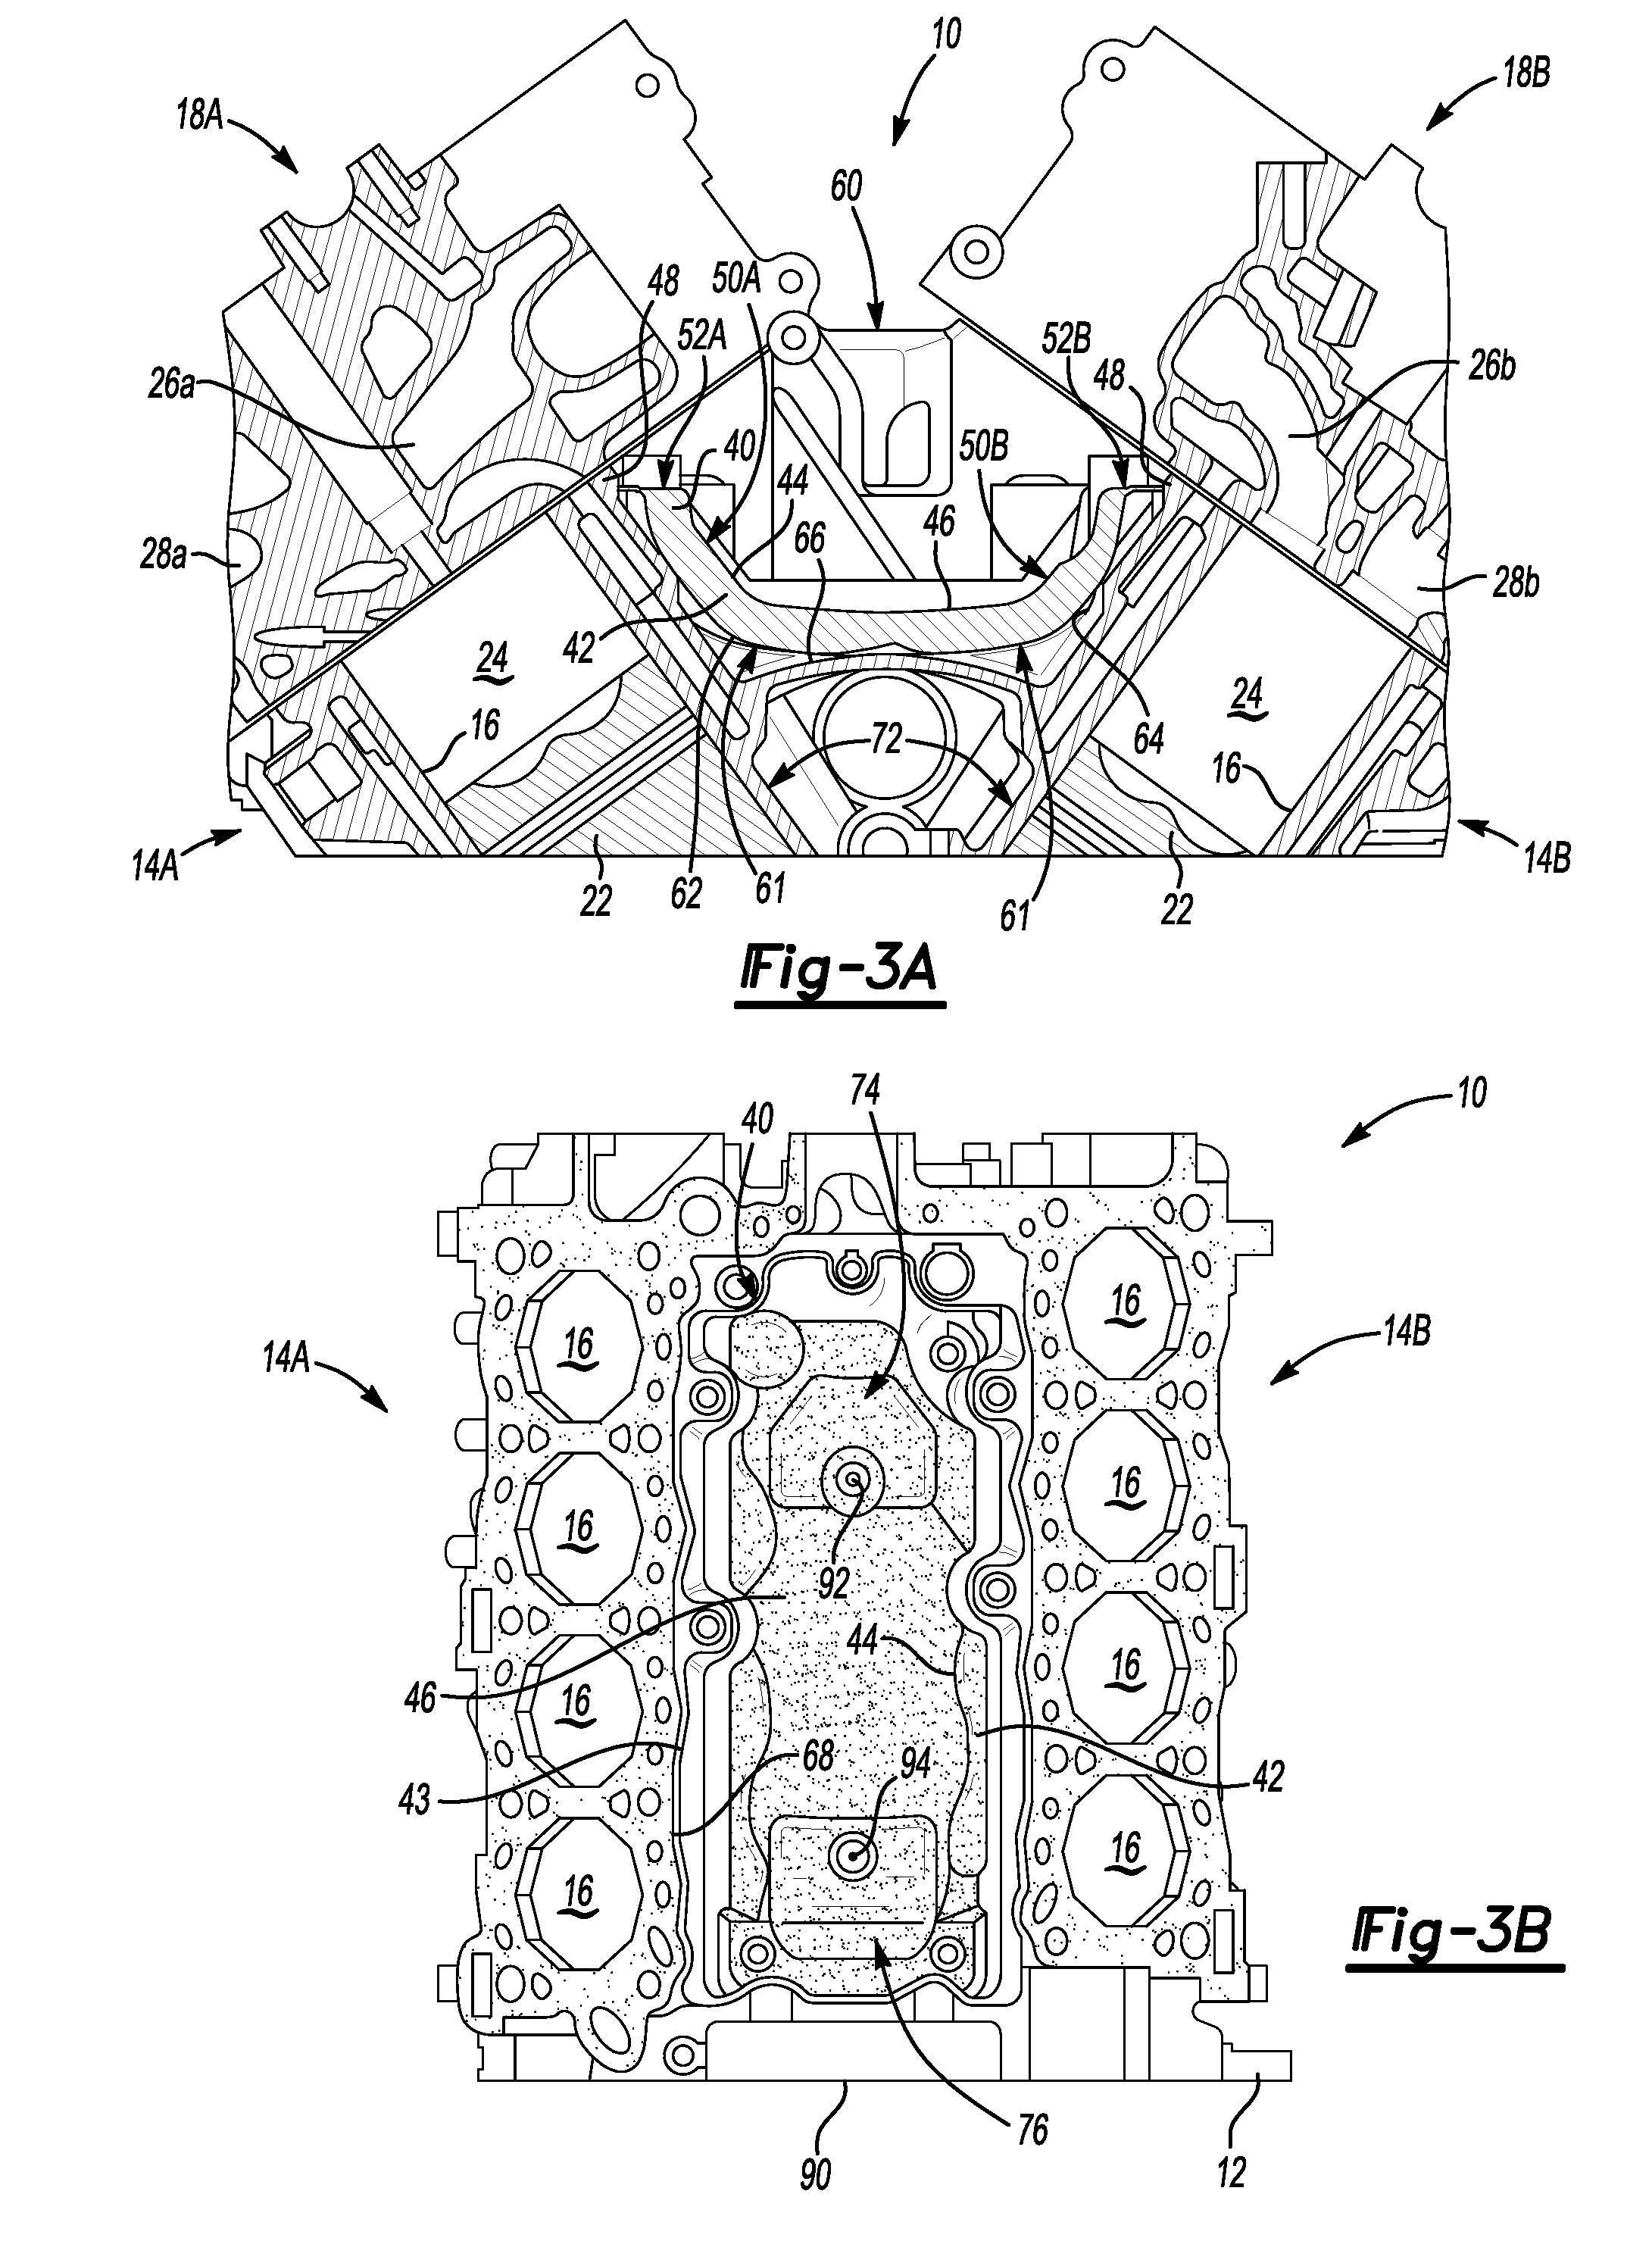 Thermal and acoustic valley shield for engine assembly